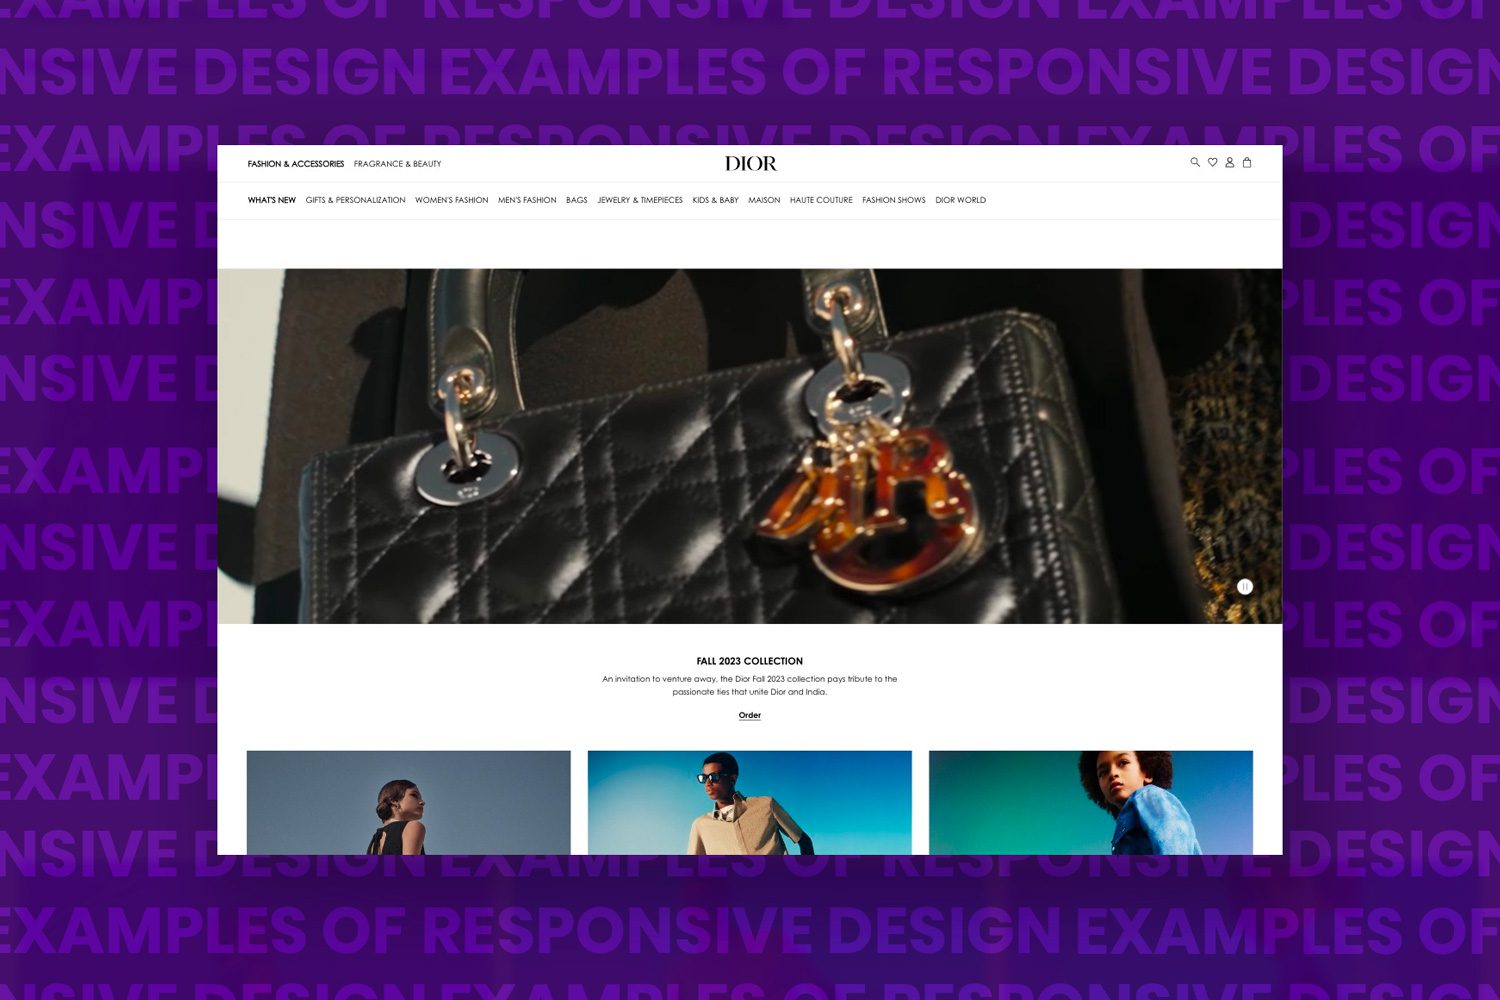 Dior website used as an example of responsive design